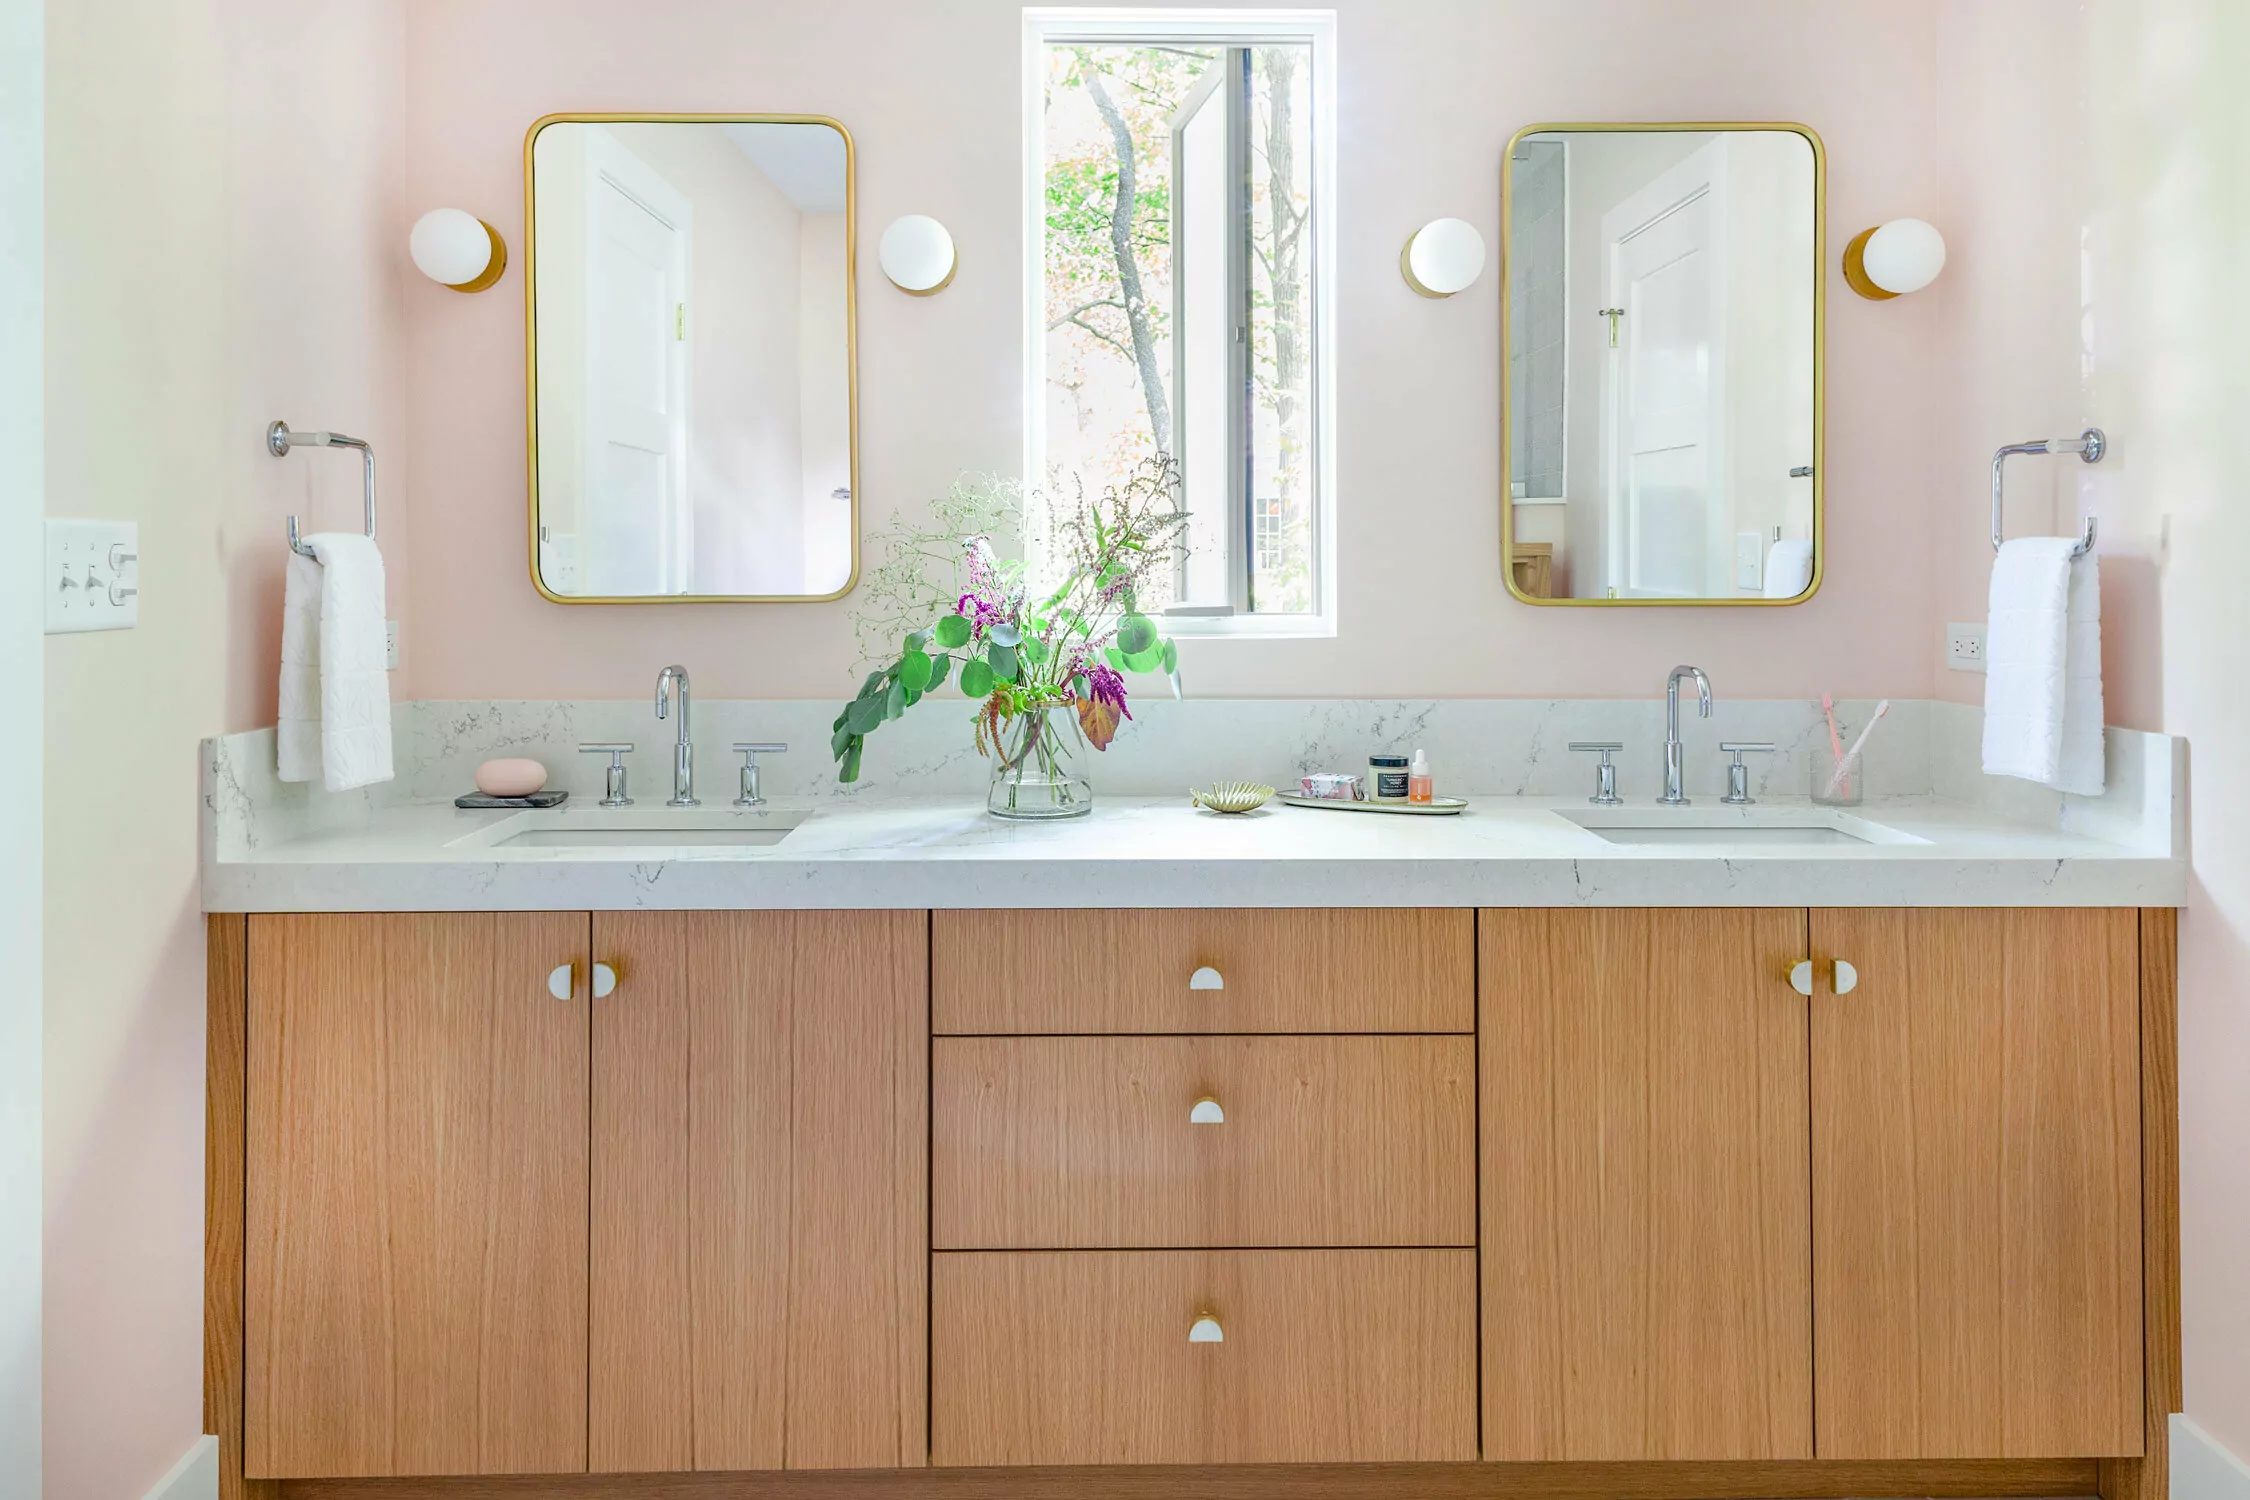 4 Improvement Ideas for Your Bathroom Remodel